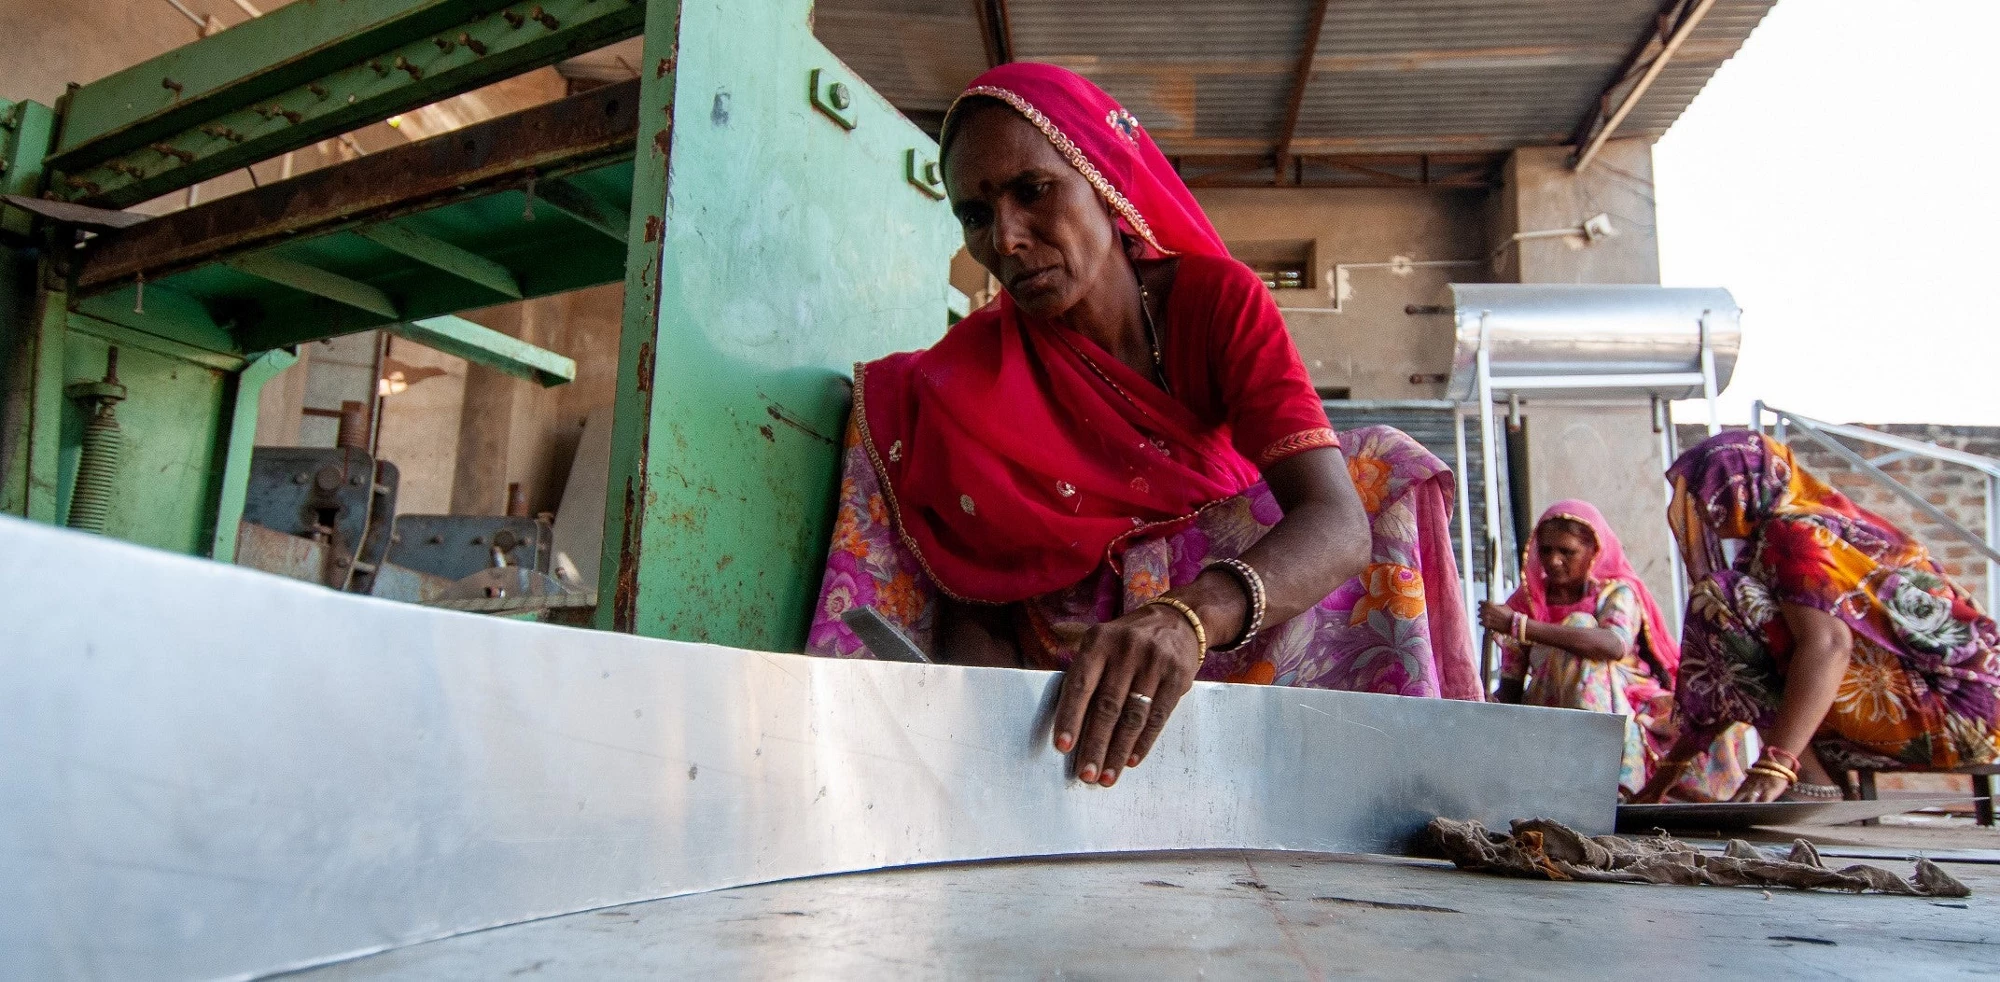 Women constructing solar cookers at the Barefoot College in Tilonia, Rajasthan, India